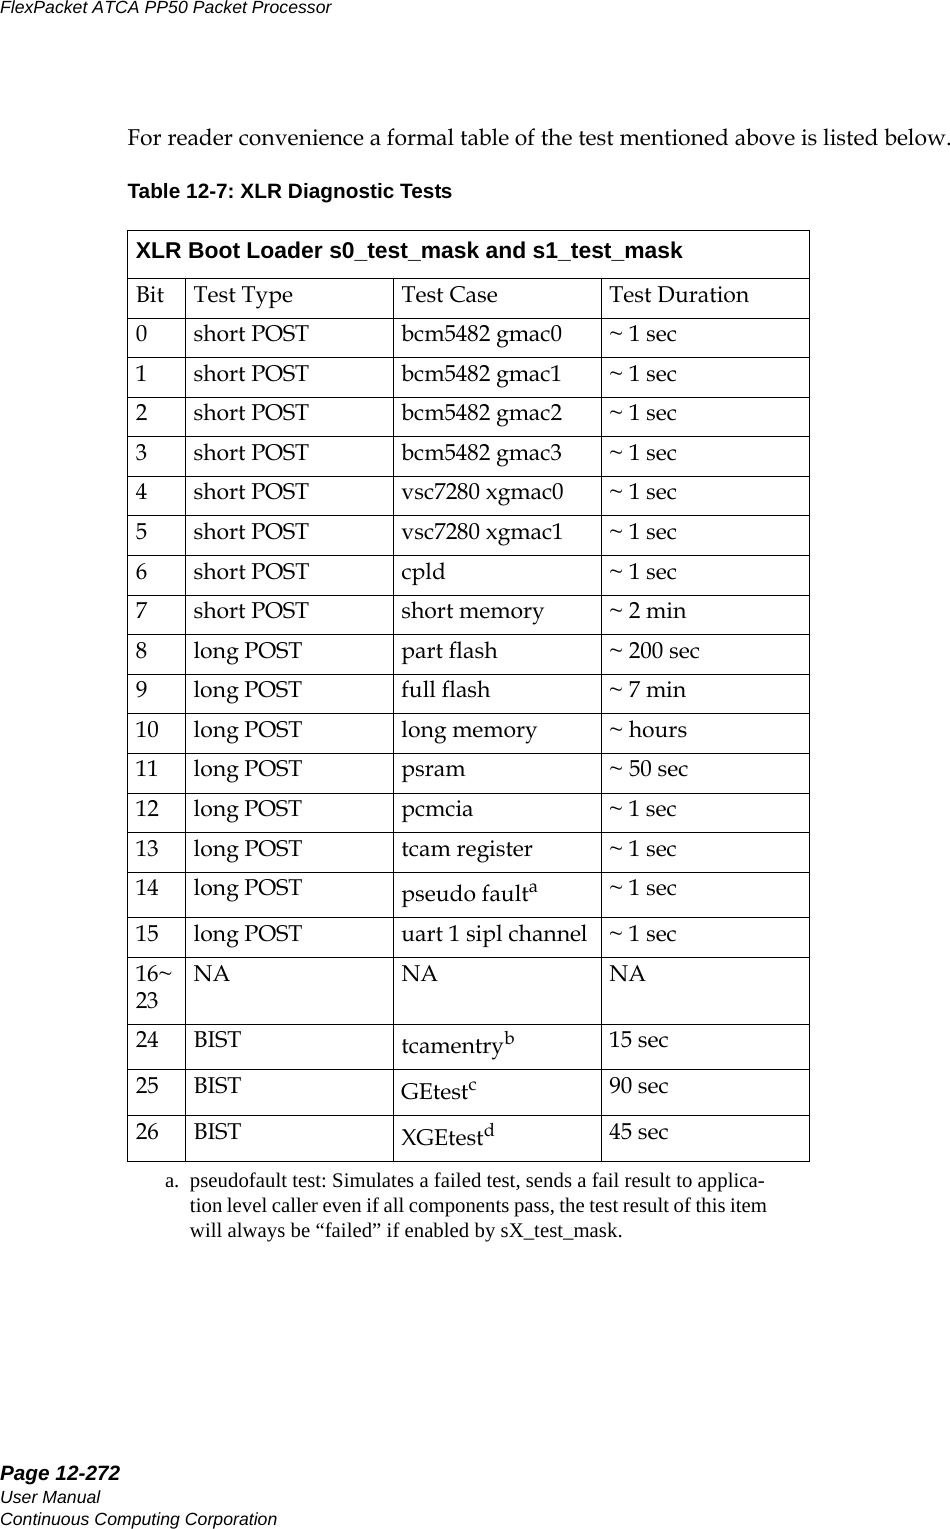 Page 12-272User ManualContinuous Computing CorporationFlexPacket ATCA PP50 Packet Processor     PreliminaryFor reader convenience a formal table of the test mentioned above is listed below.Table 12-7: XLR Diagnostic TestsXLR Boot Loader s0_test_mask and s1_test_maskBit Test Type Test Case Test Duration0 short POST bcm5482 gmac0 ~ 1 sec1 short POST bcm5482 gmac1 ~ 1 sec2 short POST bcm5482 gmac2 ~ 1 sec3 short POST bcm5482 gmac3 ~ 1 sec4 short POST vsc7280 xgmac0 ~ 1 sec5 short POST vsc7280 xgmac1 ~ 1 sec6short POST cpld ~ 1 sec7 short POST short memory ~ 2 min8 long POST part flash ~ 200 sec9 long POST full flash ~ 7 min10 long POST long memory ~ hours11 long POST psram ~ 50 sec12 long POST pcmcia ~ 1 sec13 long POST tcam register ~ 1 sec14 long POST pseudo faultaa. pseudofault test: Simulates a failed test, sends a fail result to applica-tion level caller even if all components pass, the test result of this item will always be “failed” if enabled by sX_test_mask.~ 1 sec15  long POST uart 1 sipl channel ~ 1 sec16~23NA NA NA24 BIST tcamentryb15 sec25 BIST GEtestc90 sec26 BIST XGEtestd45 sec